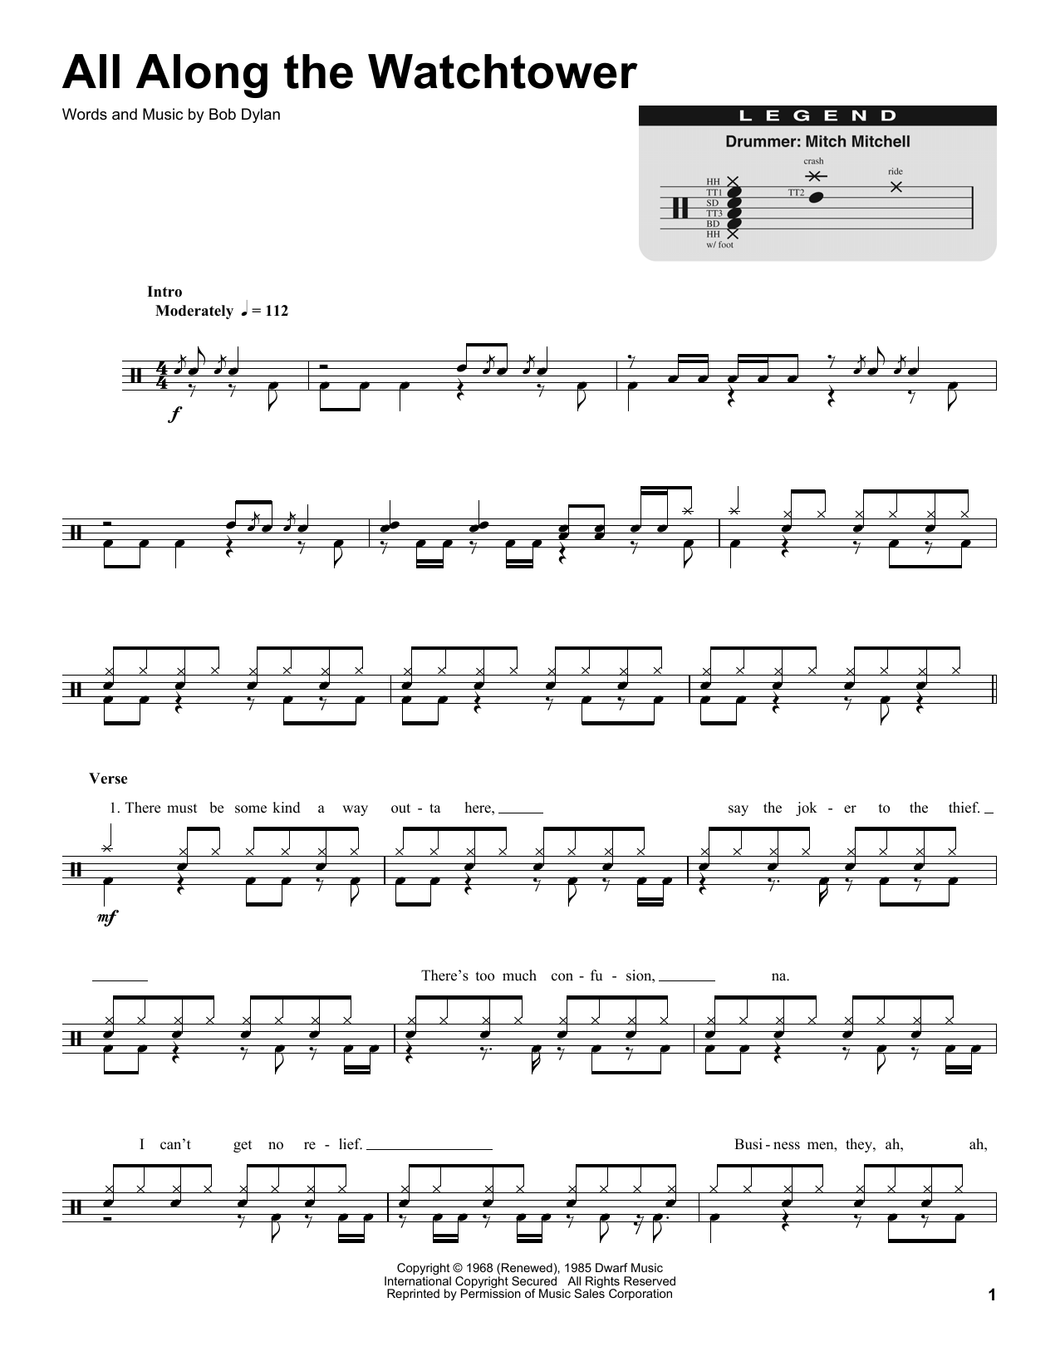 All Along The Watchtower - Jimi Hendrix - Full Drum Transcription / Drum Sheet Music - SheetMusicDirect DT